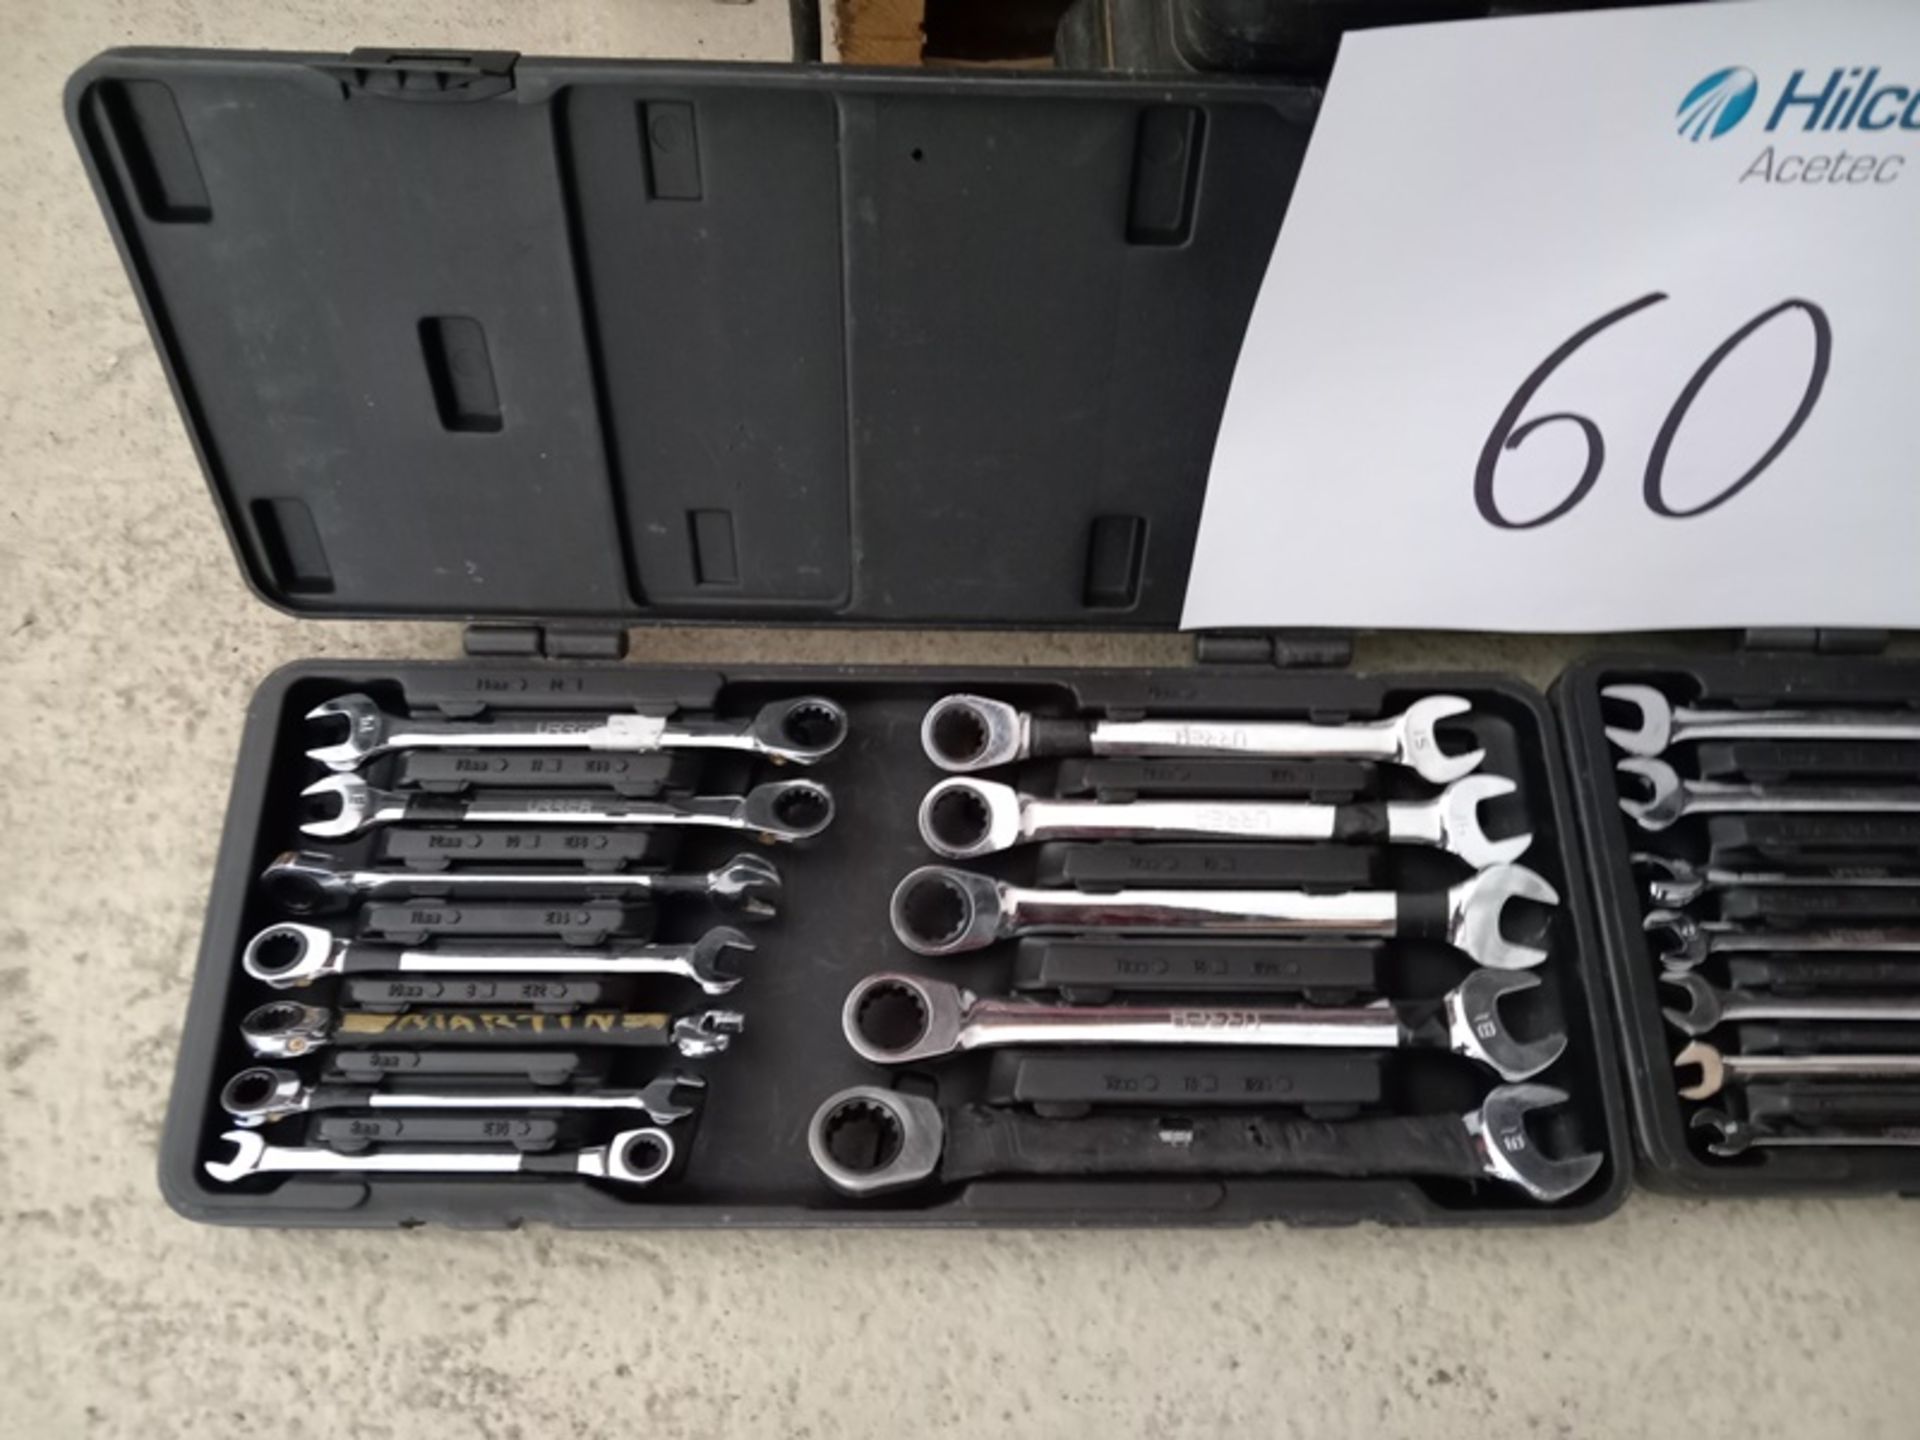 LOT OF (12) RATCHET COMBINATION WRENCH SETS - Image 4 of 7